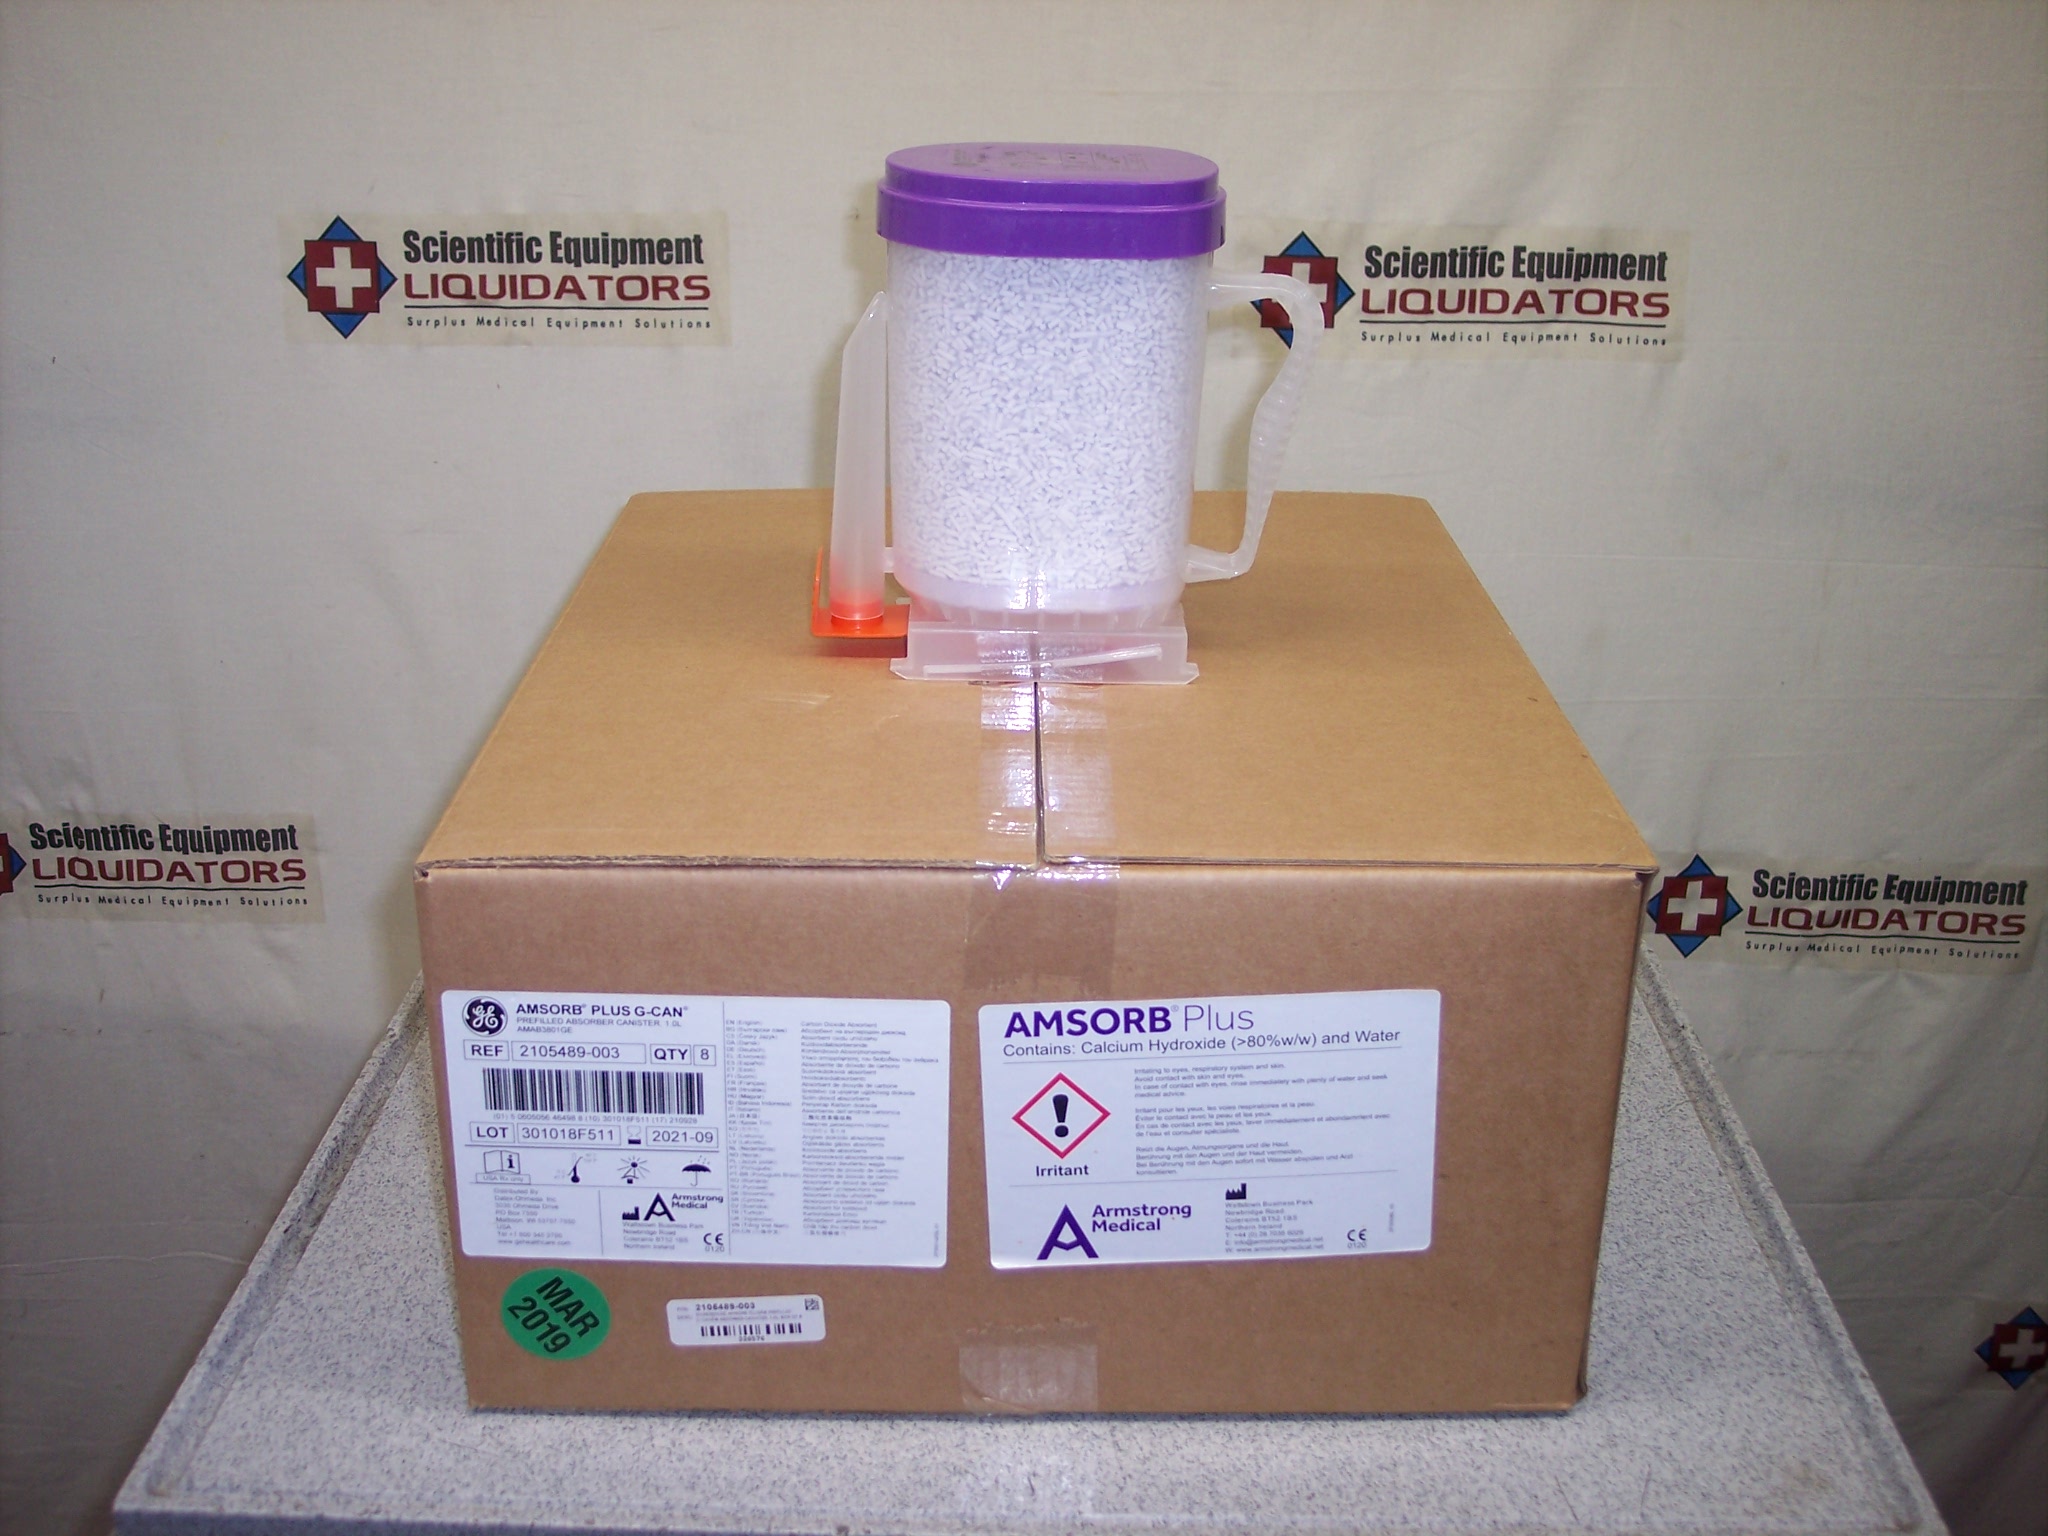 GE Amsorb Plus G-Can Prefilled Absorber Canister 1.0L REF: 2105489-003 Case of 8